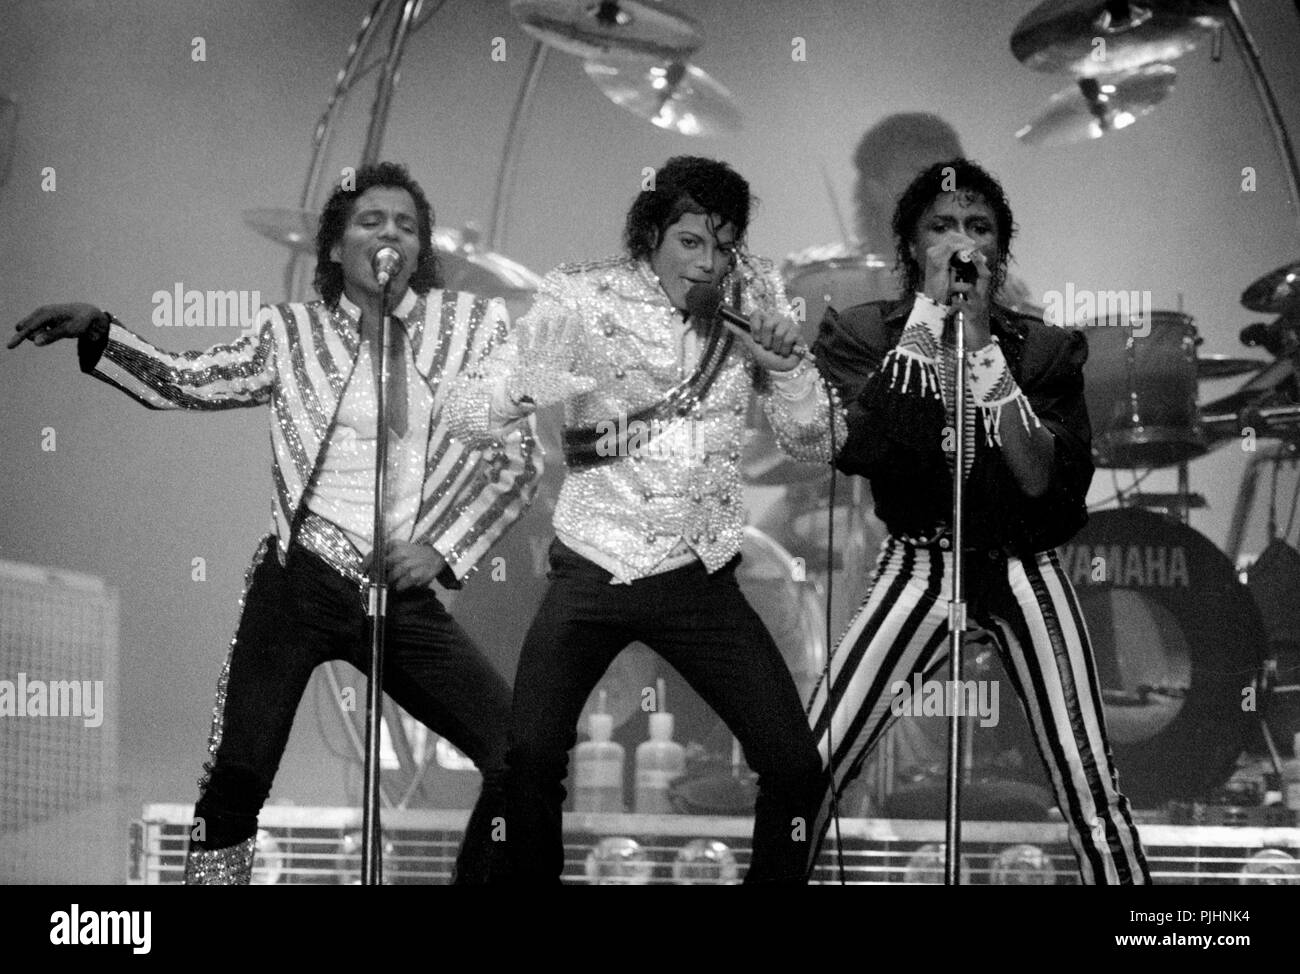 Michael Jackson performs at Chicago's Comiskey Park in 1984. Stock Photo